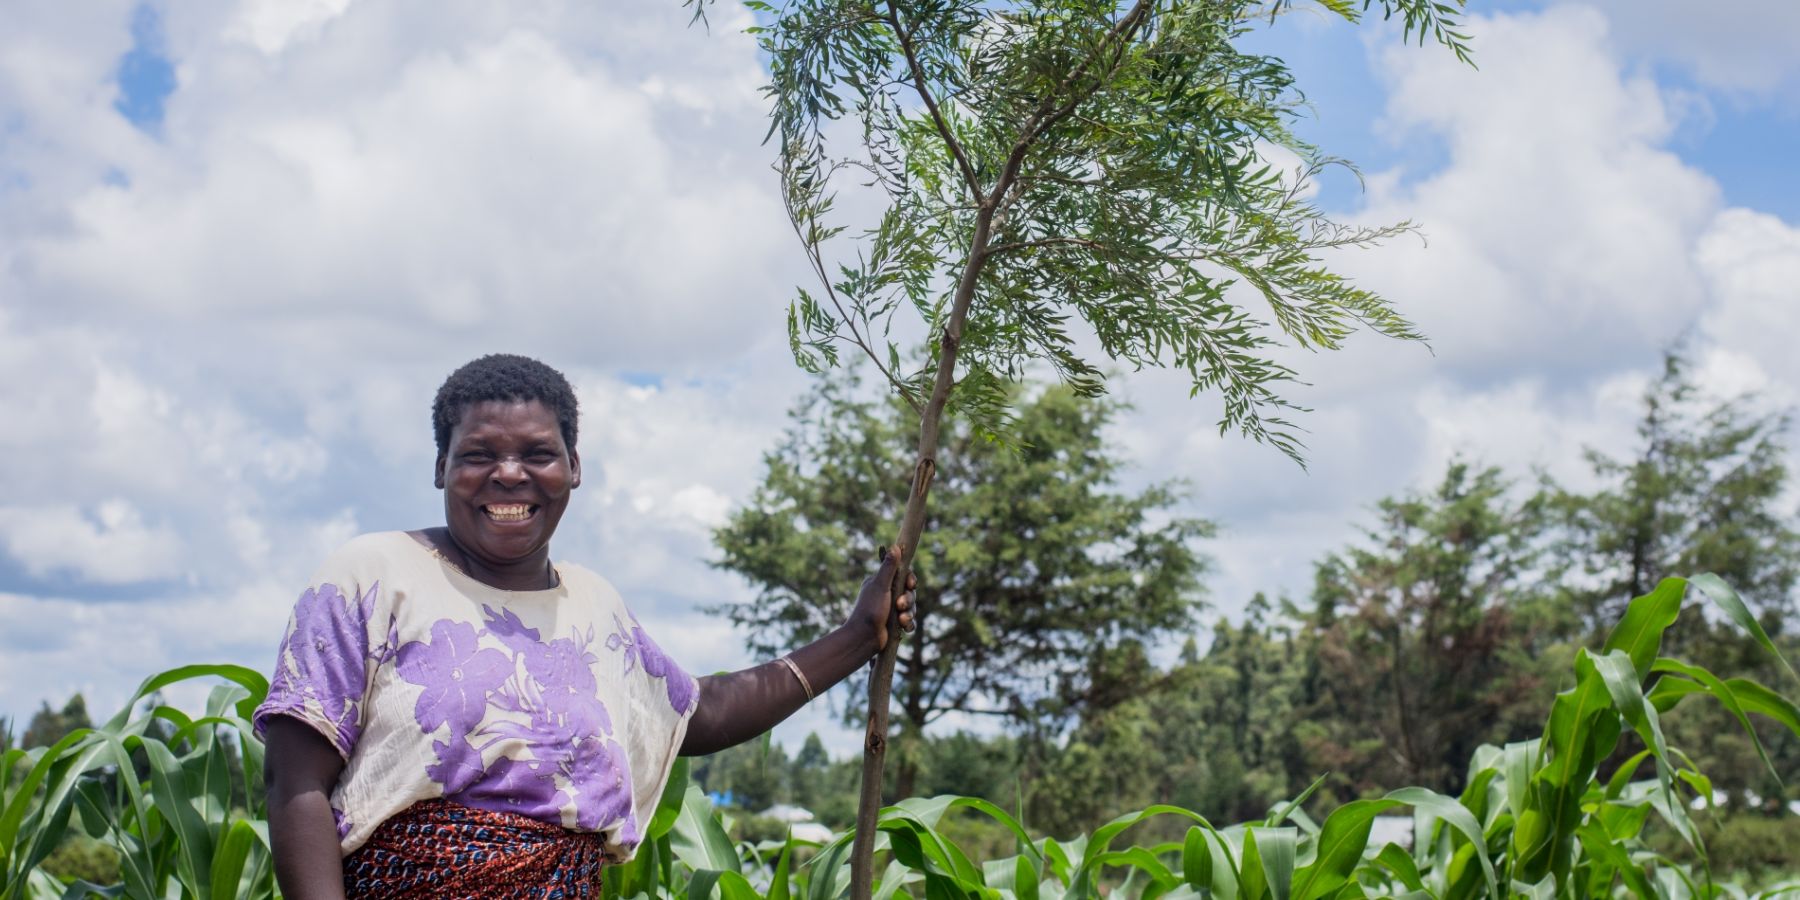 A farmer in Tanzania stands with her tree sapling